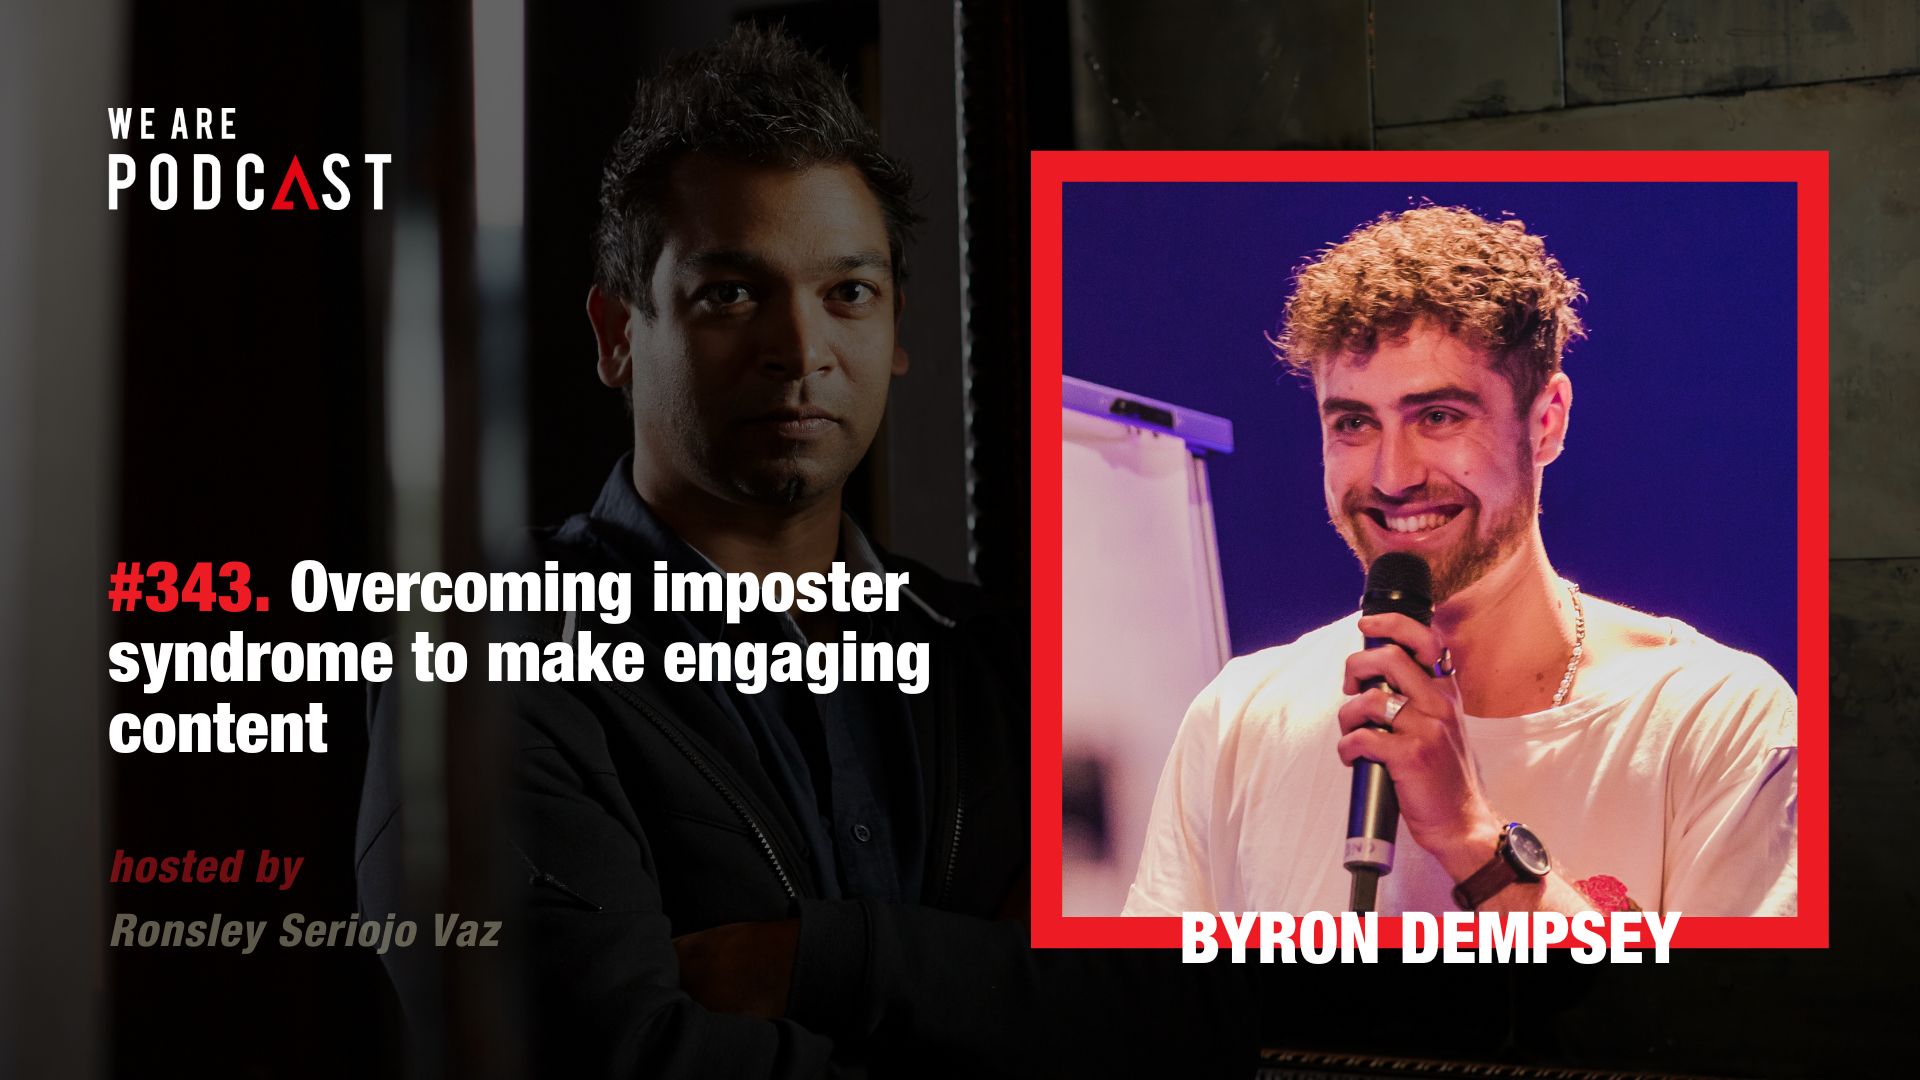 Featured image for “343. Overcoming imposter syndrome to make engaging content feat. Byron Dempsey”